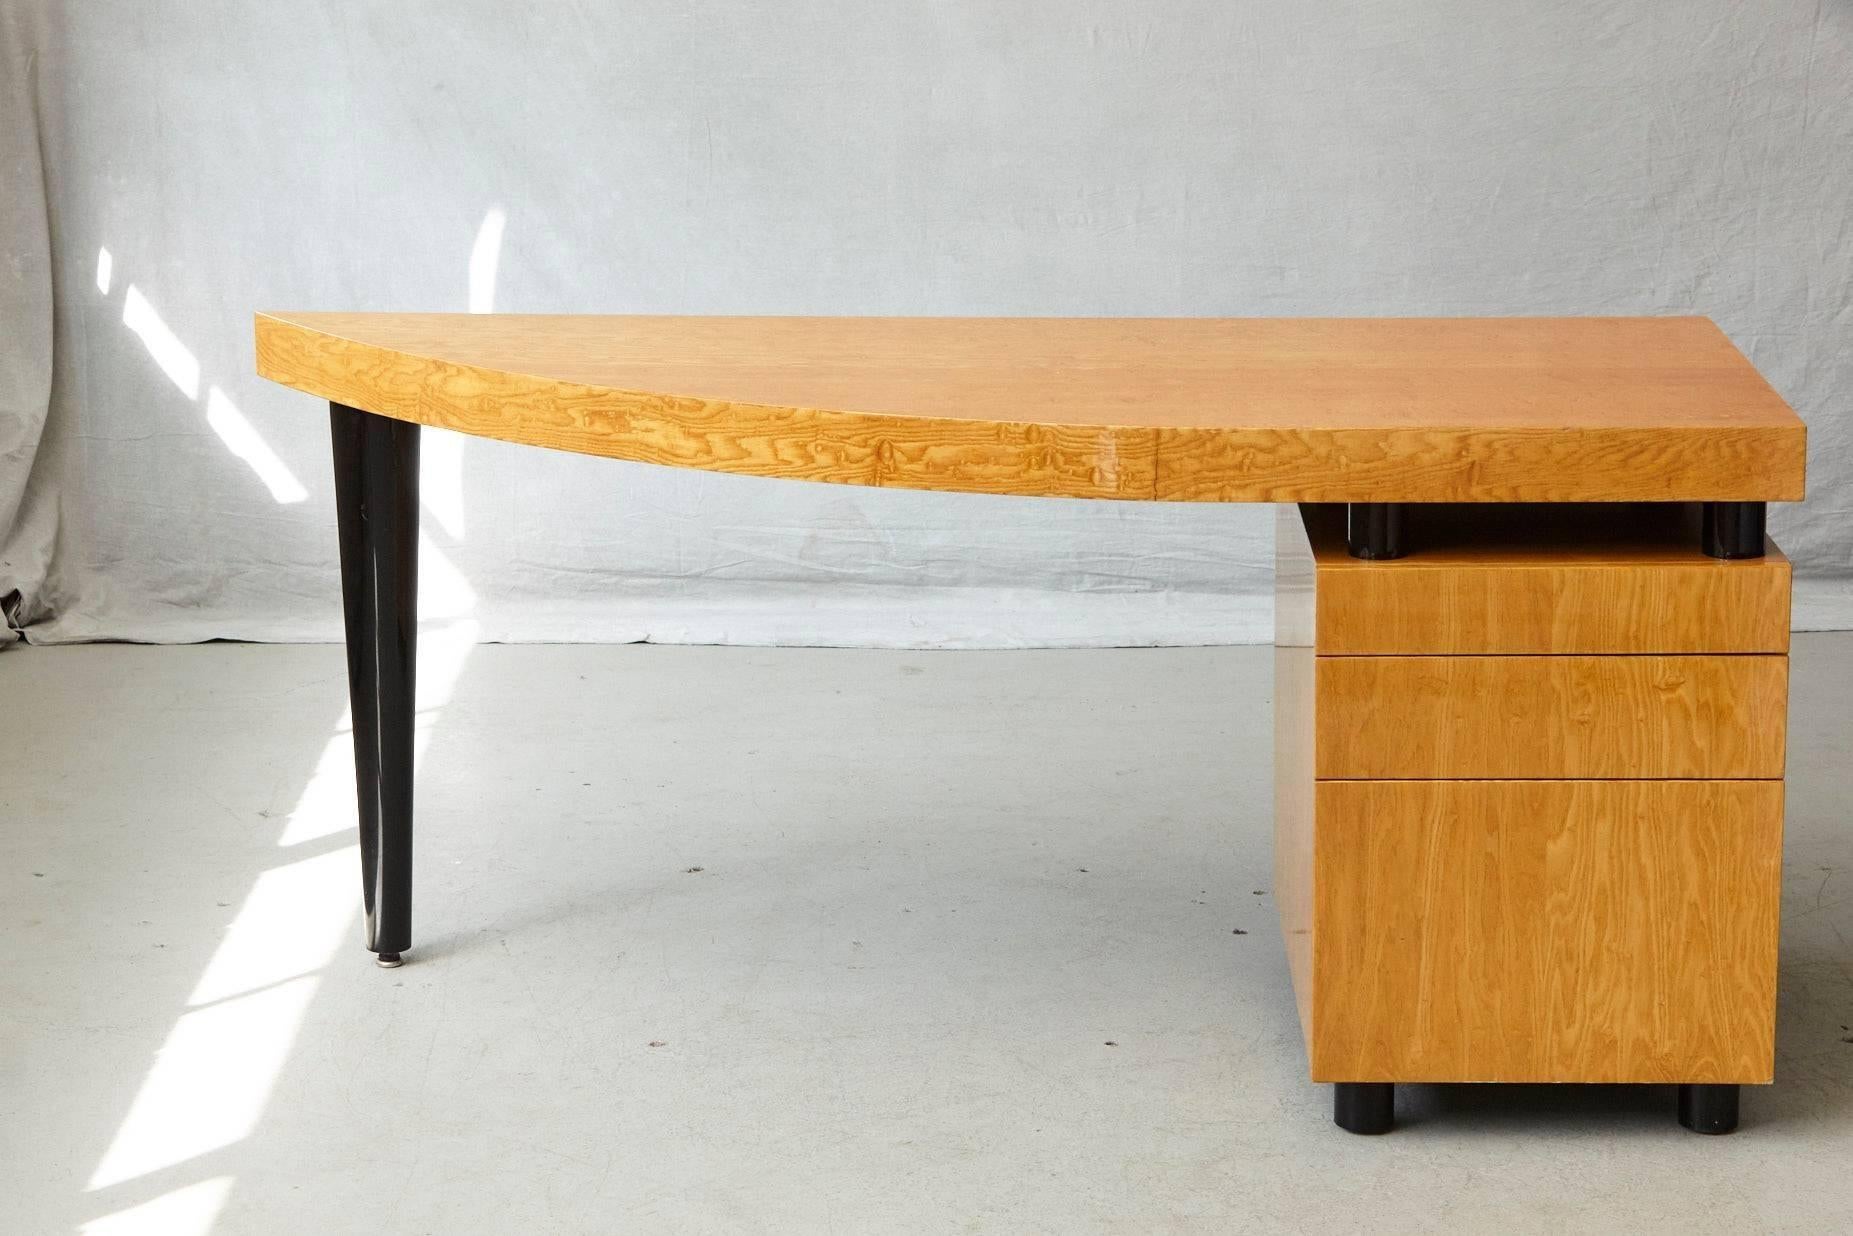 Triangular, almost sail-shaped desk in high gloss lacquered walnut with three drawers. The desk is mounted on cylindrical black lacquered legs, with one prominent tapered black lacquered leg.

There are two flaws along the edge, which are